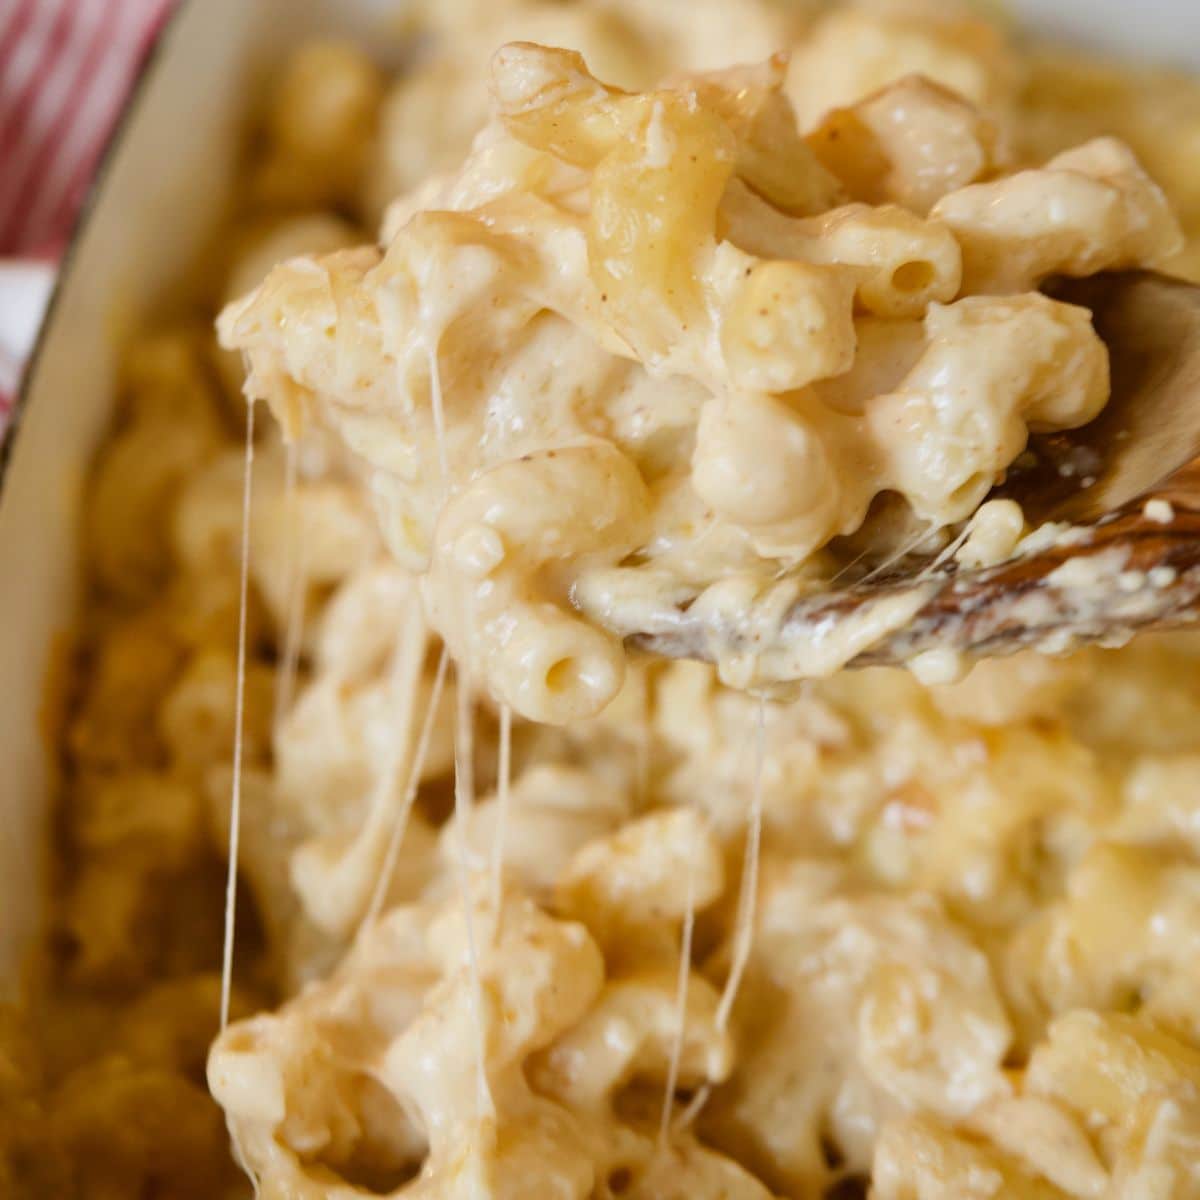 Smoked mac and cheese with stringy cheese pulling from a spoon.